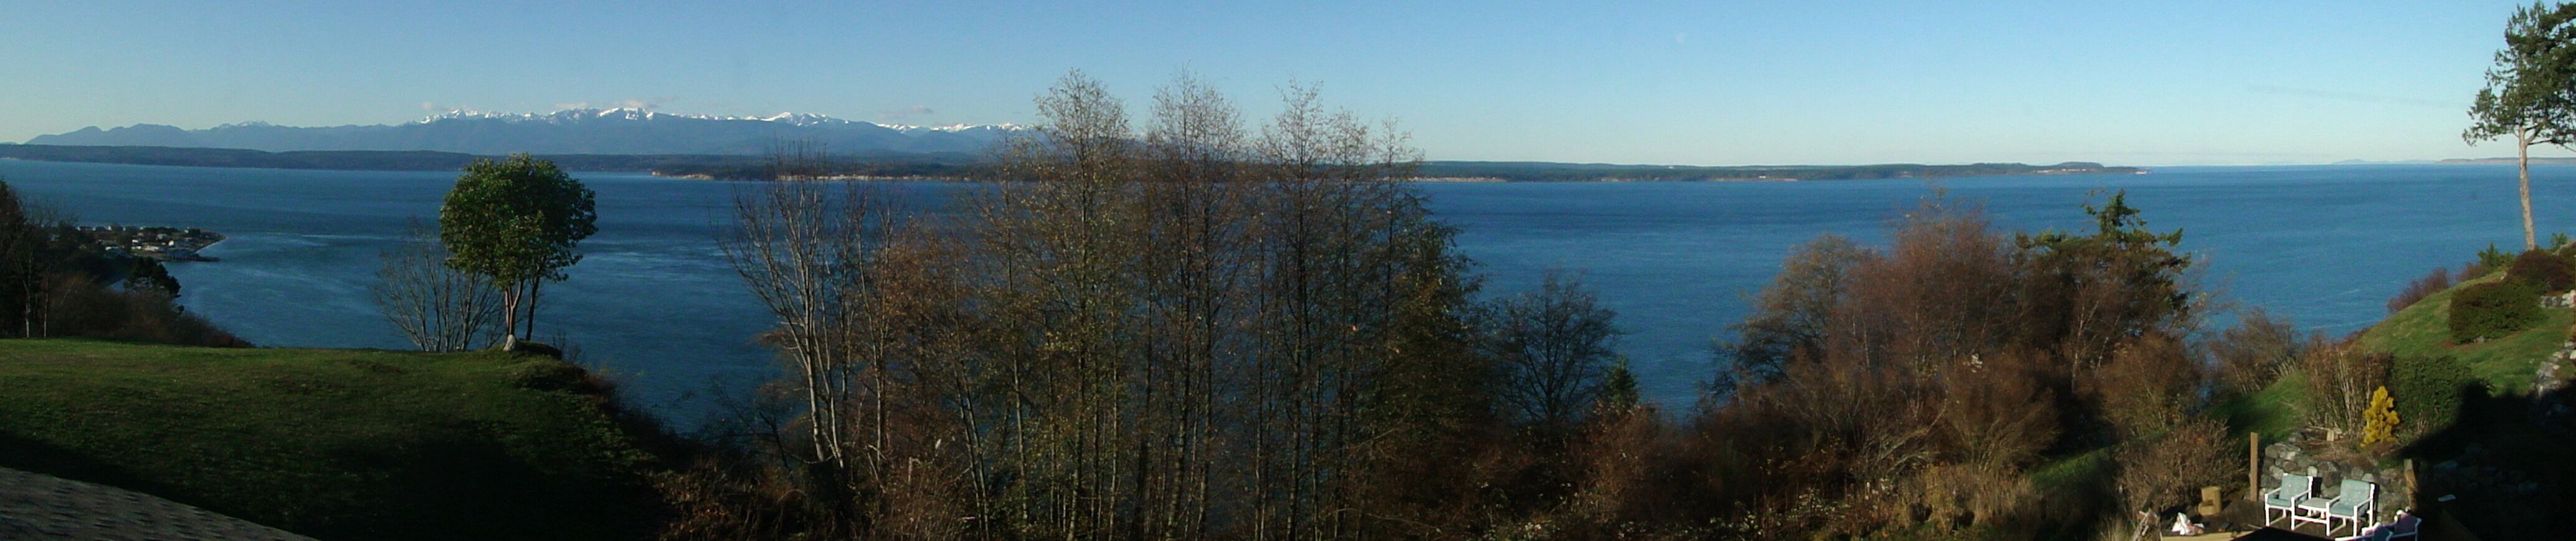 Panoramic digital photo of the Olympic Mountains I took from our home on December 5, 2009.